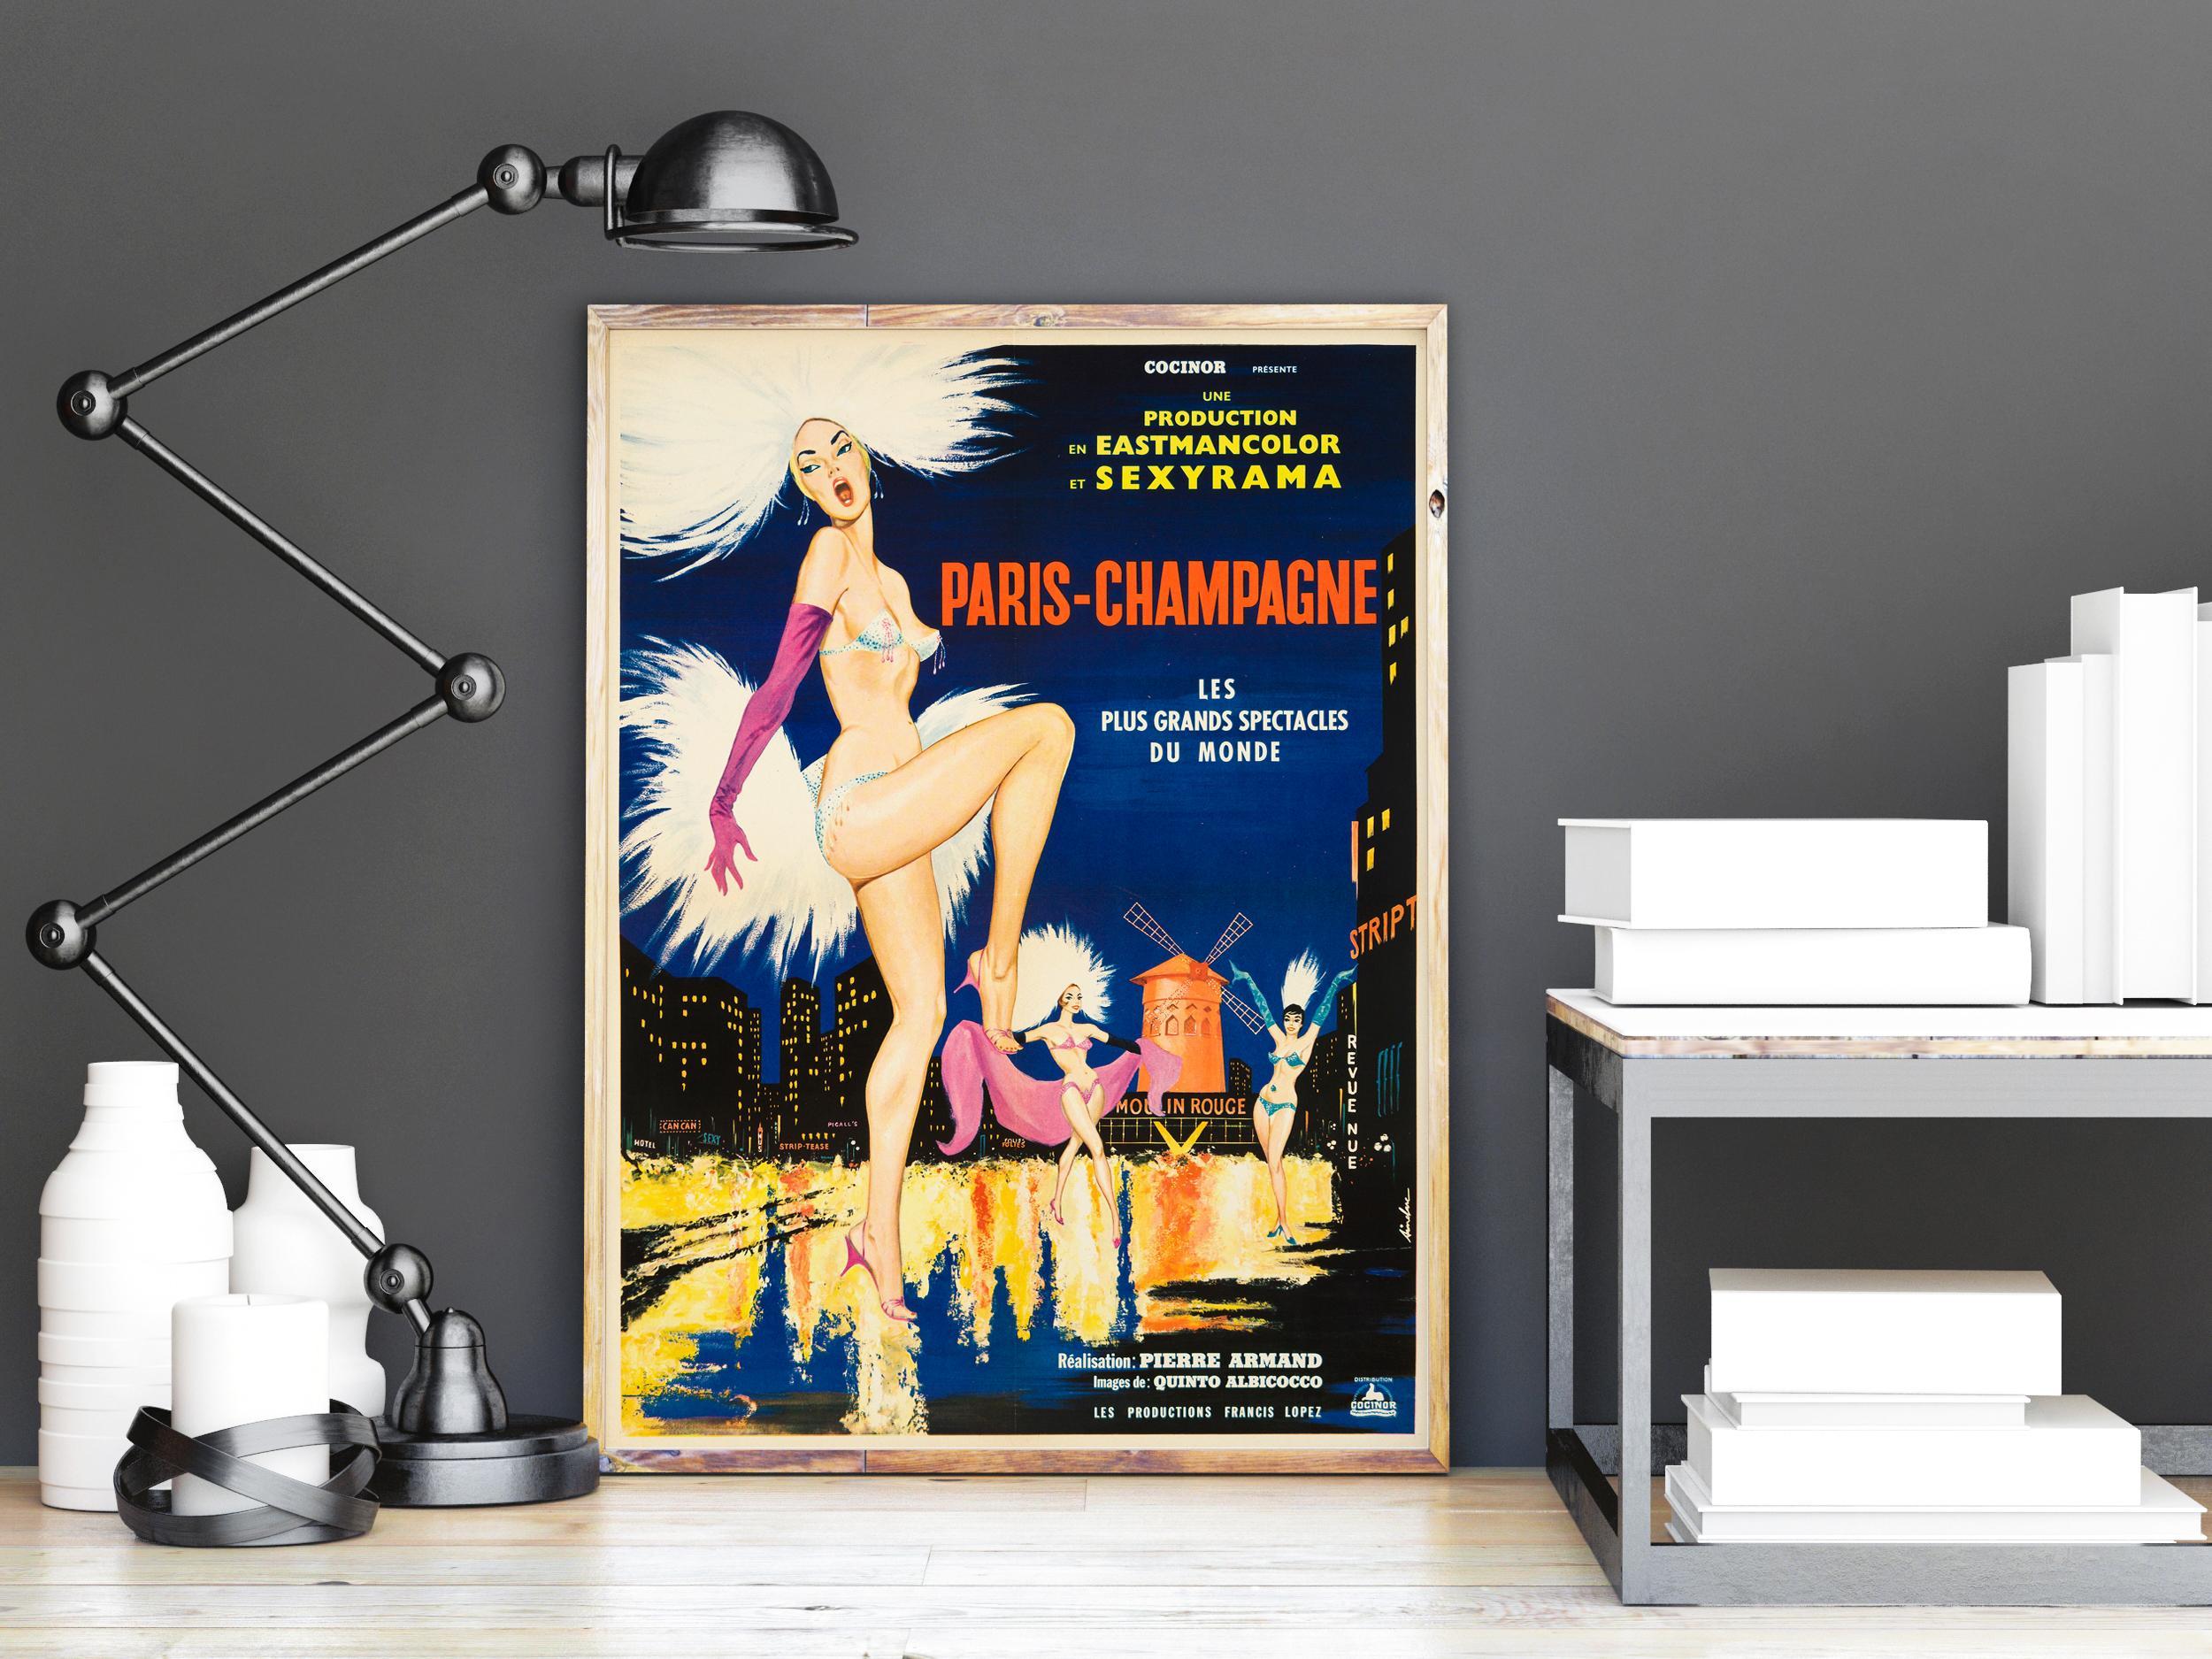 Although the film itself is somewhat unknown, released only in France and the Netherlands, this stunning French Moyenne poster for the 1964 Pierre Armand melodrama 'Paris-Champagne' stands on it's own, with its colourful can-can dancers set against